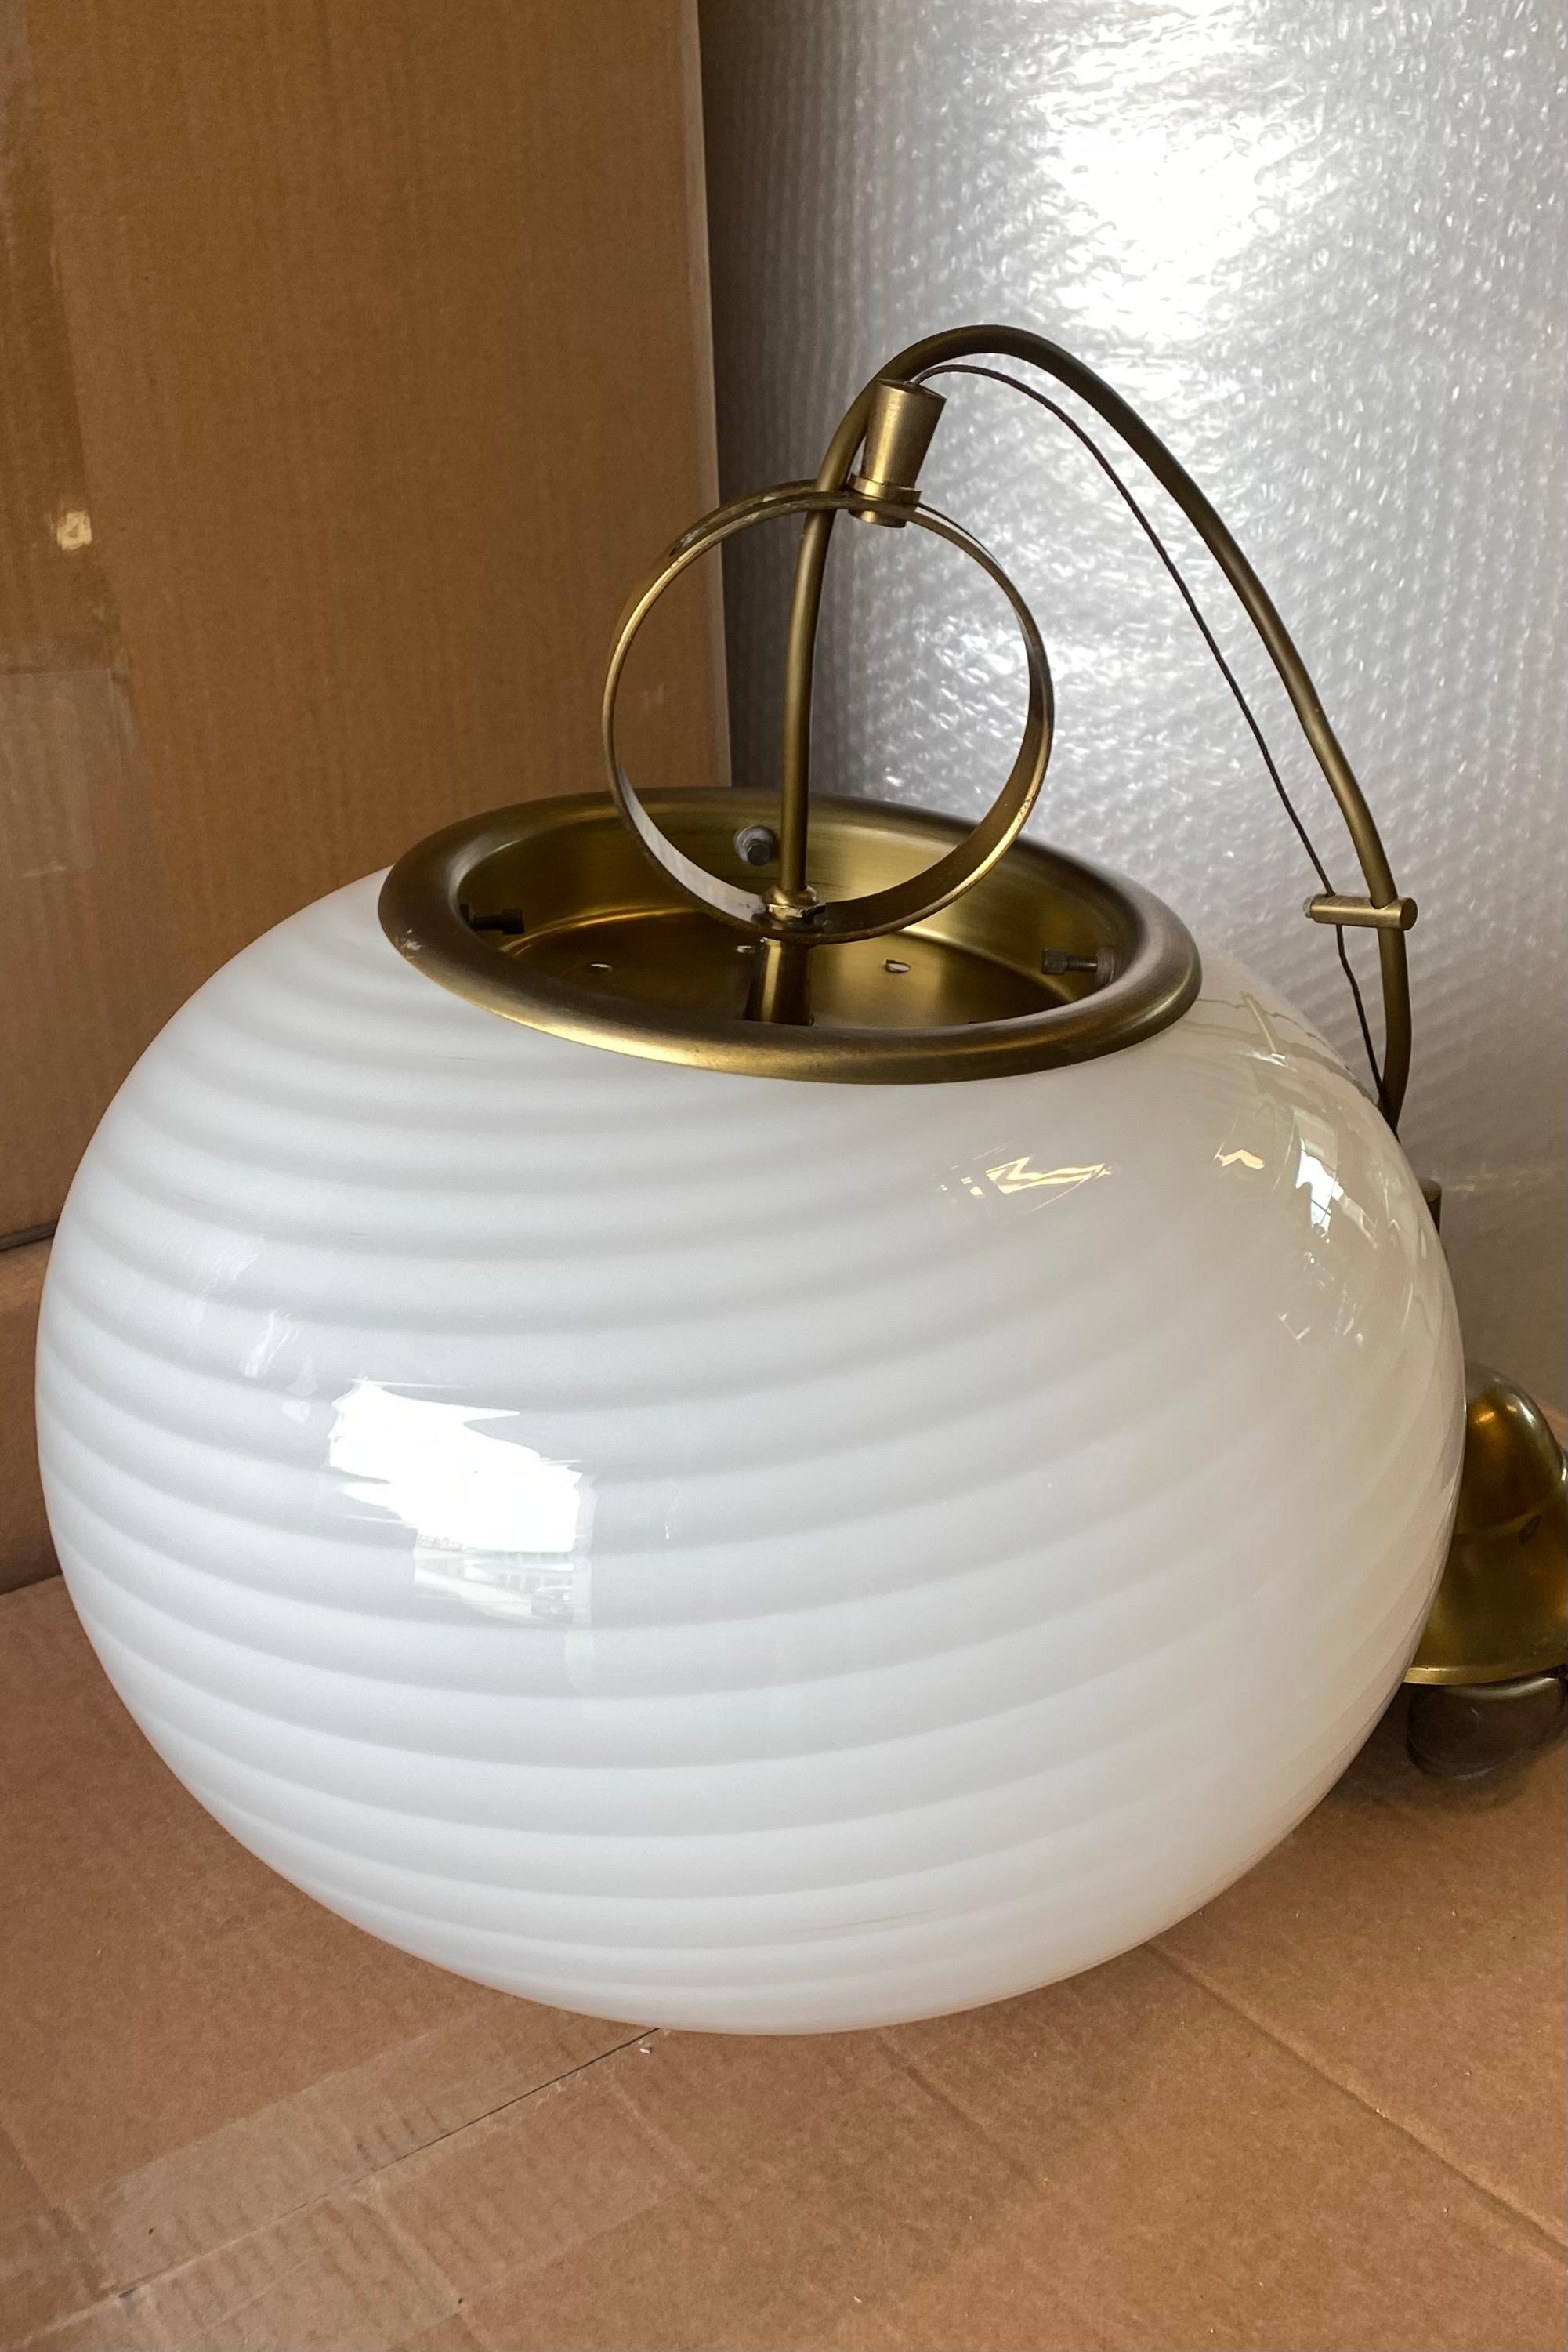 Vintage Murano pendant ceiling lamp in white opaline glass. The glass is mouth-blown in an oval shape with a beautiful swirl pattern. Handmade in Italy, 1970s, and comes with original adjustable suspension in patinated brass. D: 34 cm H: 25 cm